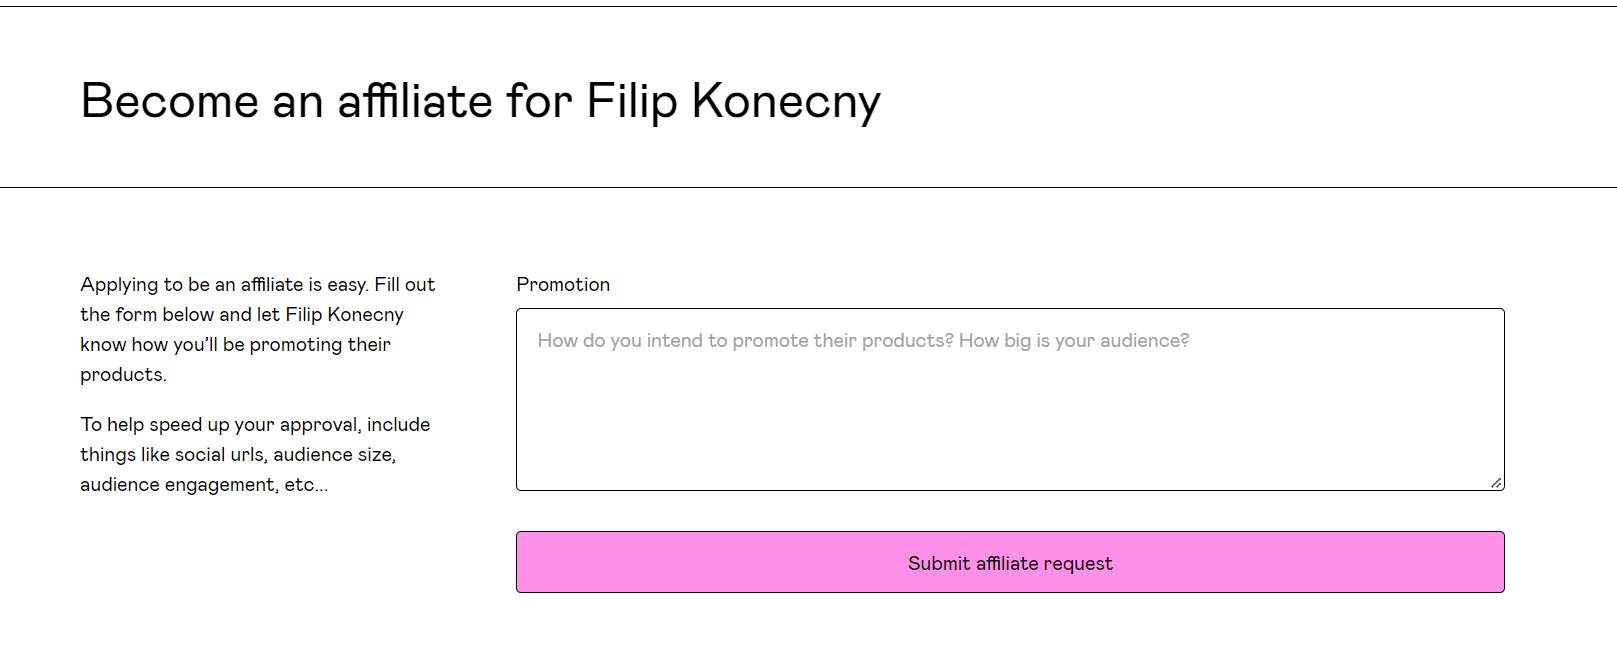 Example of an affiliate form